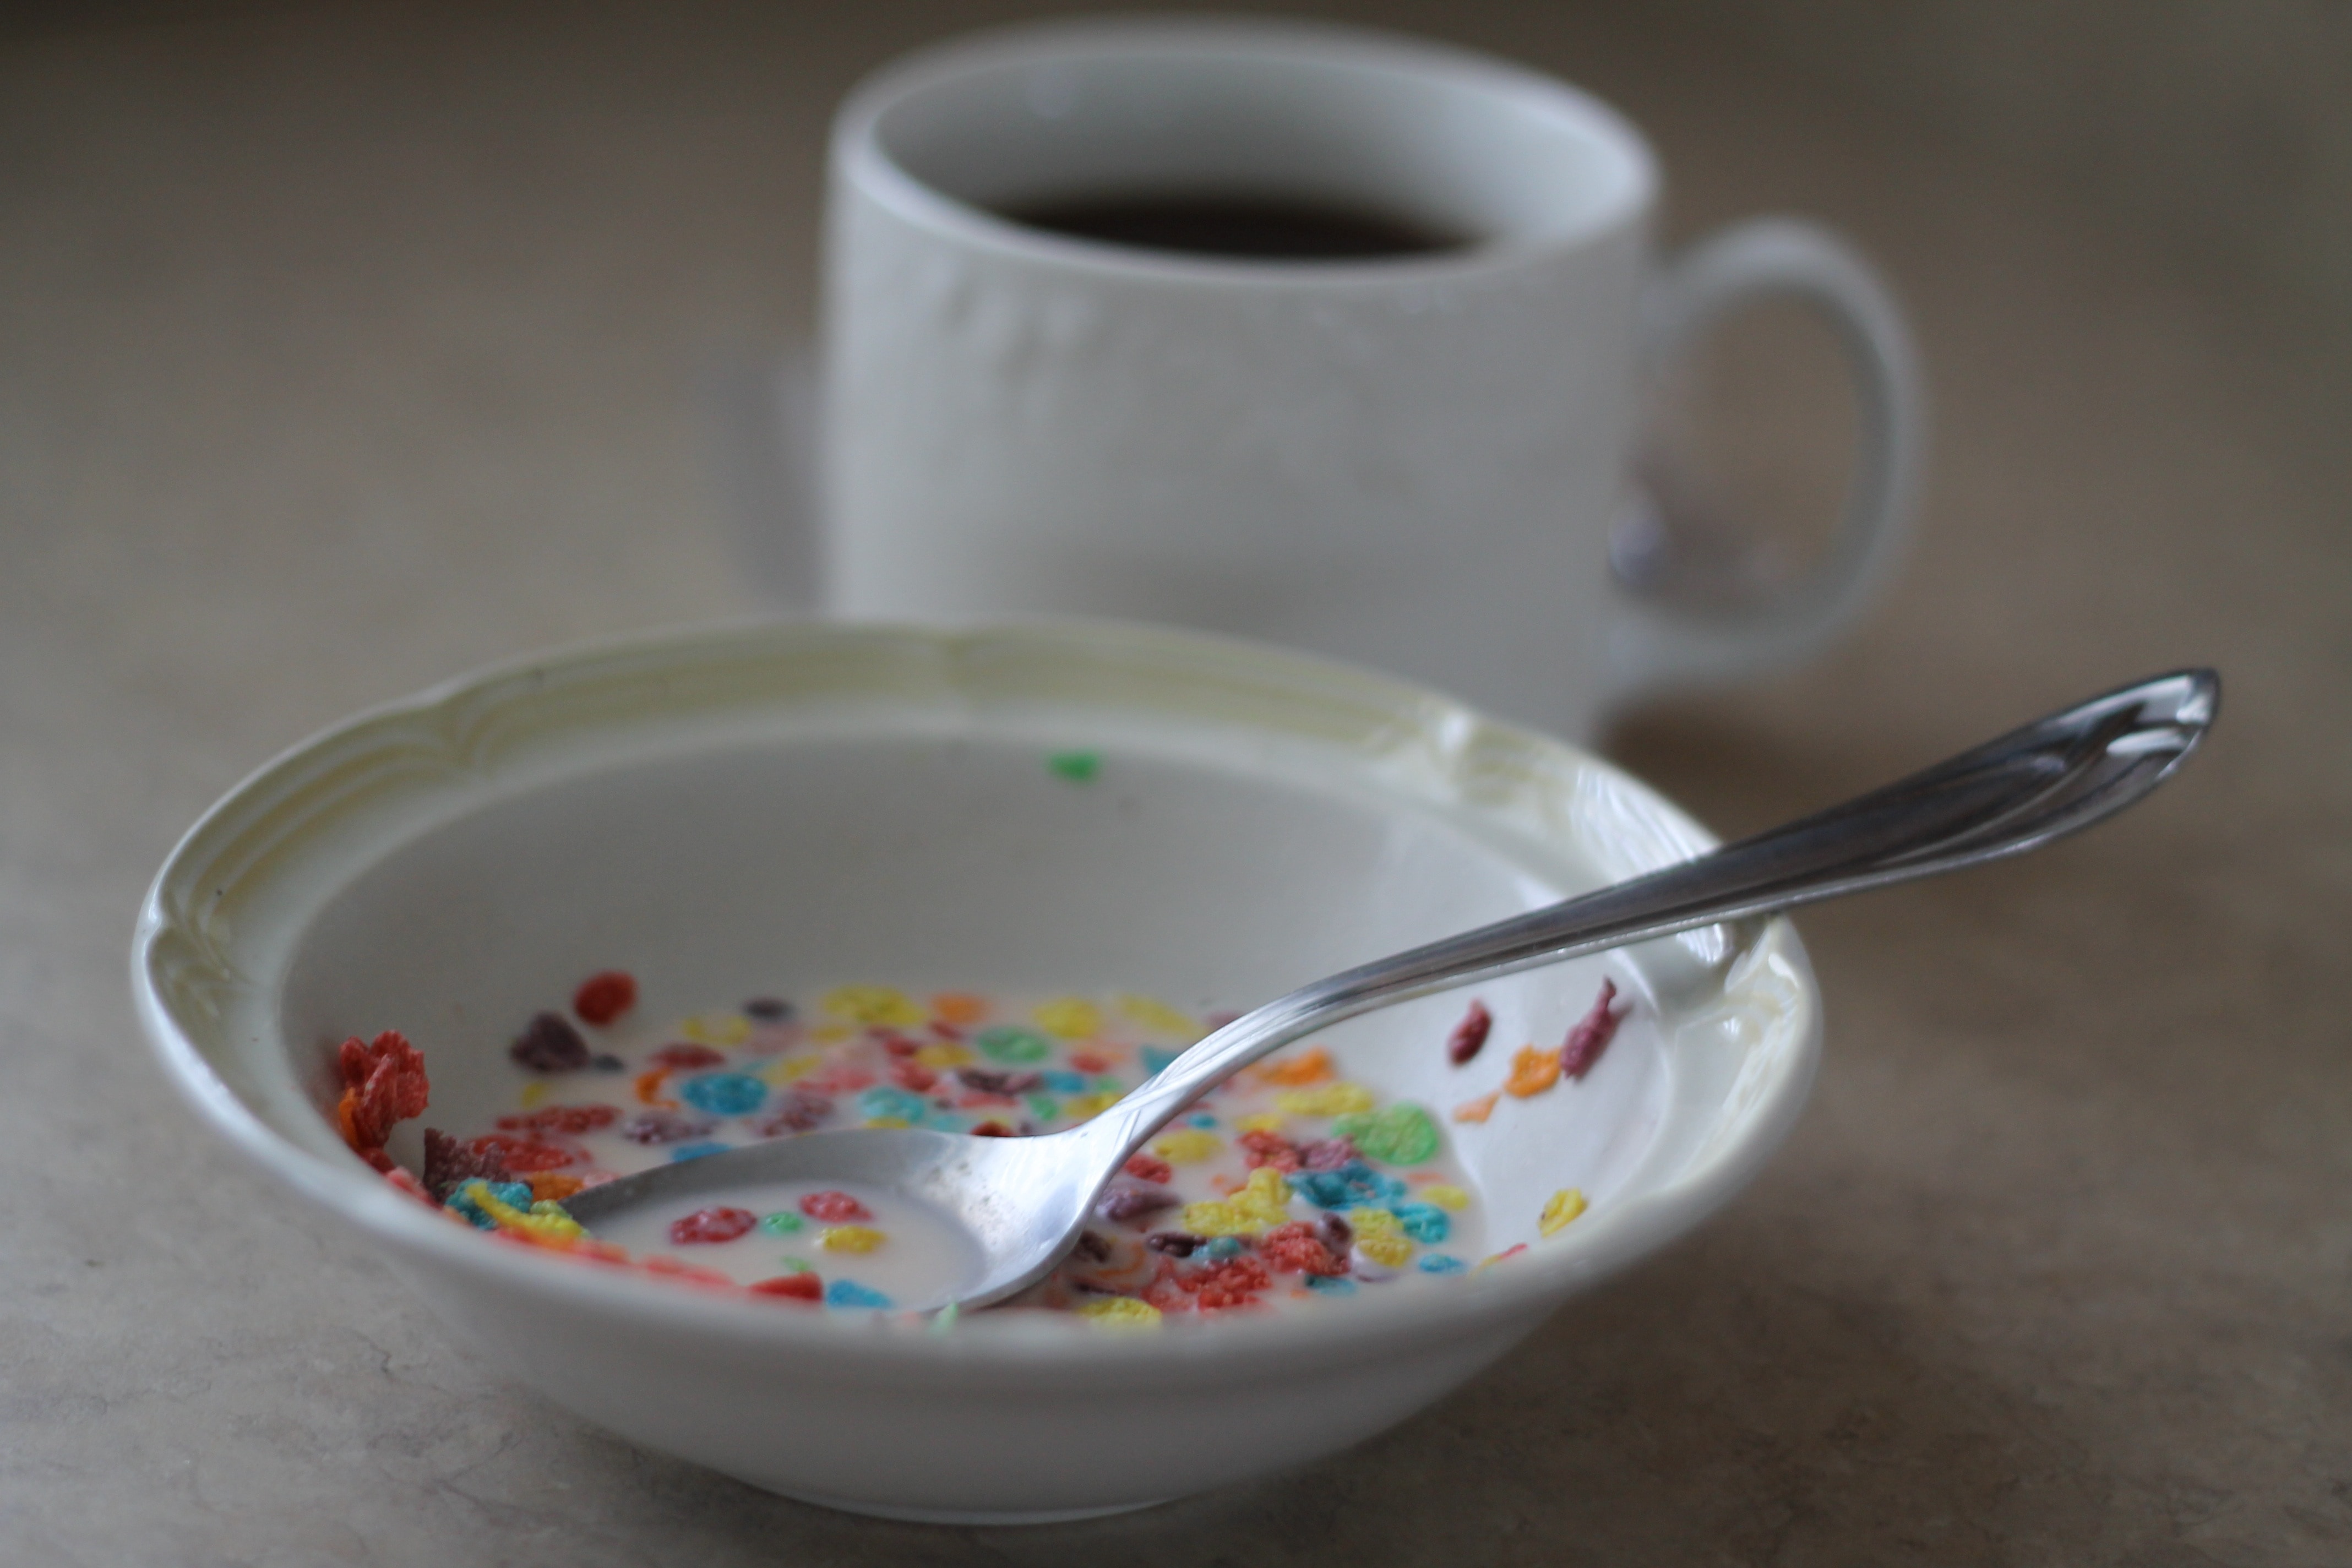 multi-colored ceramic bowl with stainless steel spoon and ceramic cup with black liquid